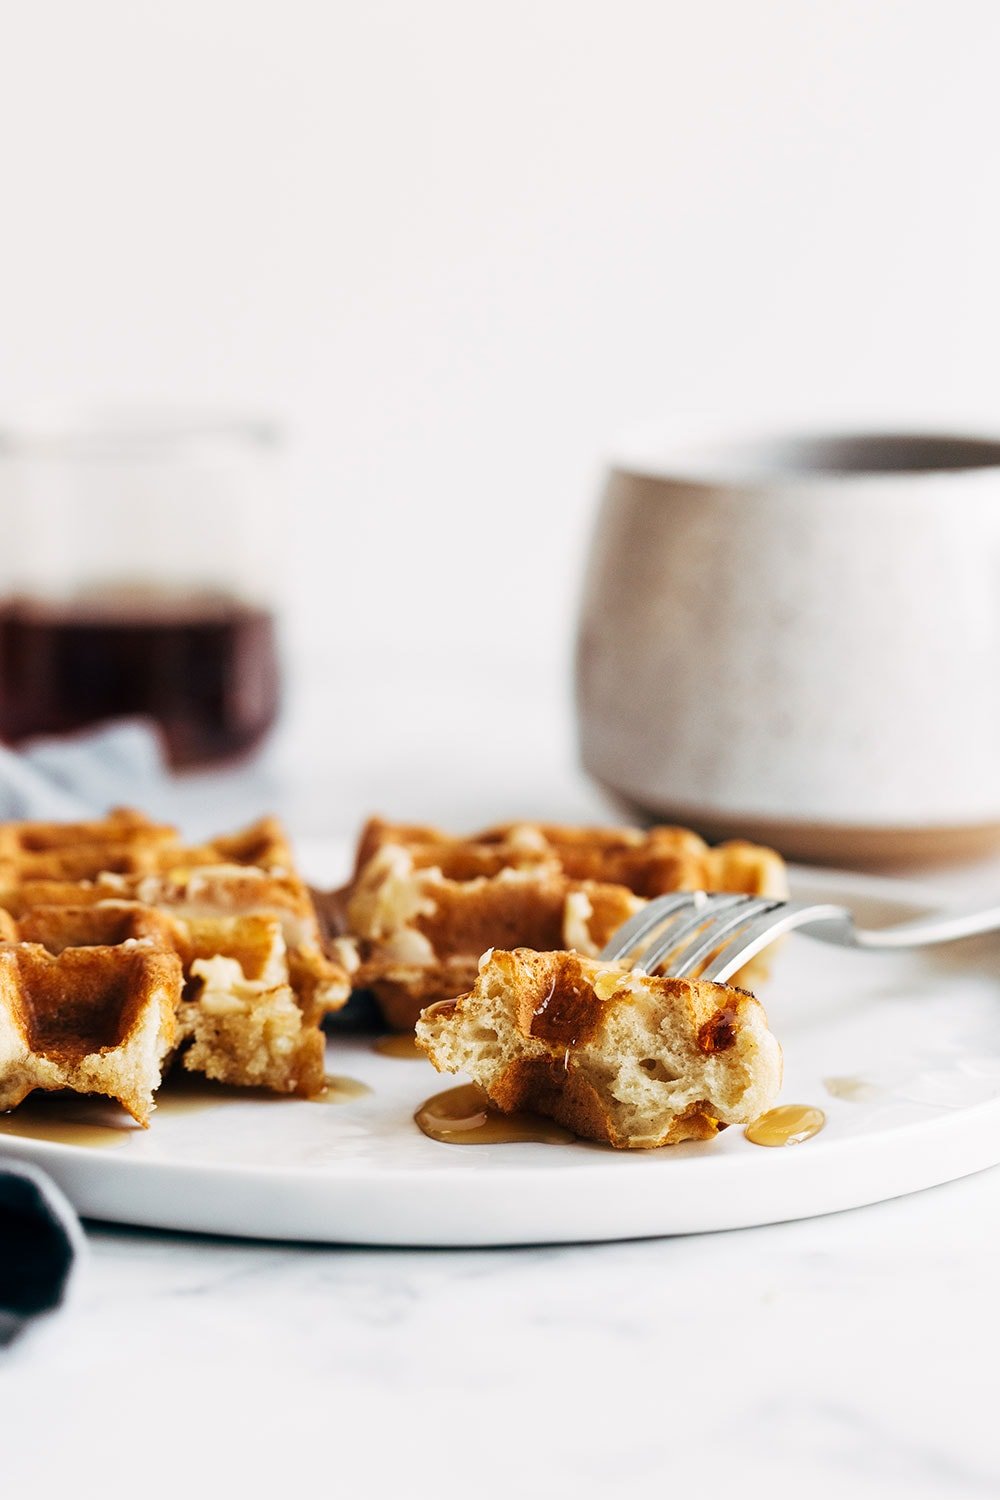 Homemade waffle on a fork with maple syrup